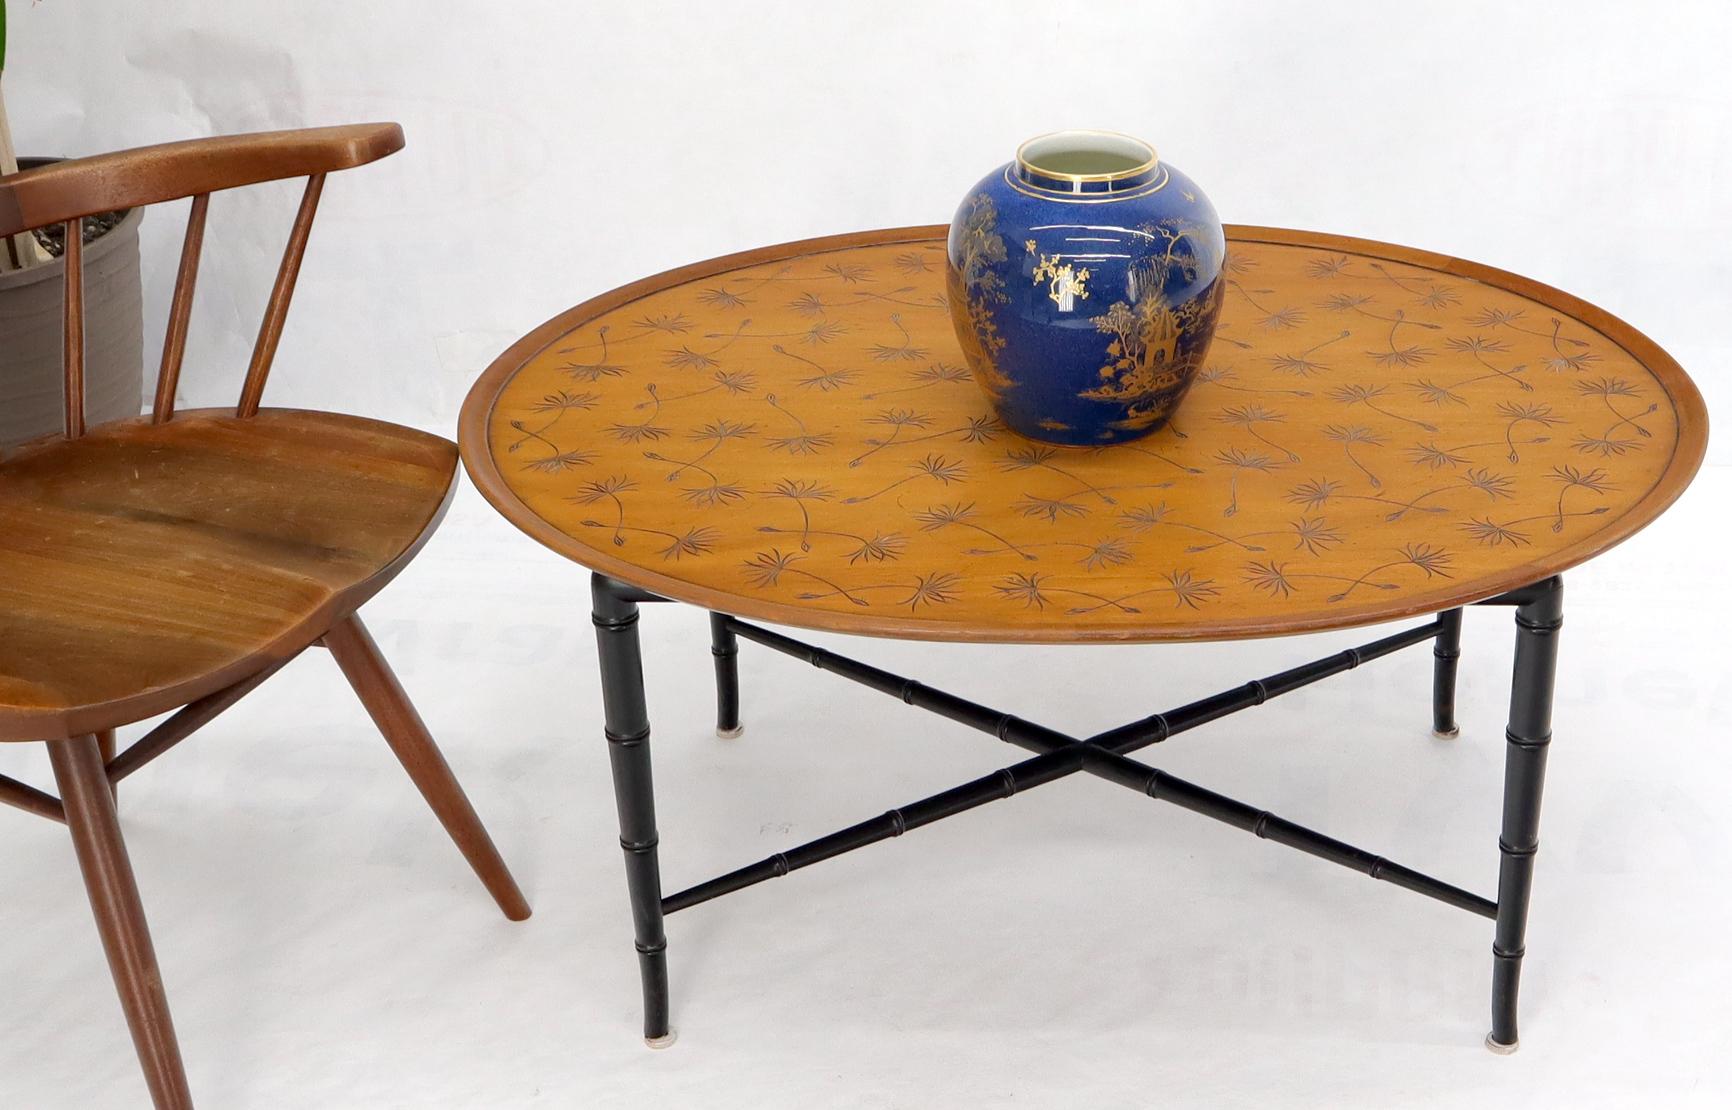 Walnut Oval Kittinger Coffee Table Faux Bamboo Tapered Legs Incised Leafs Design on Top For Sale